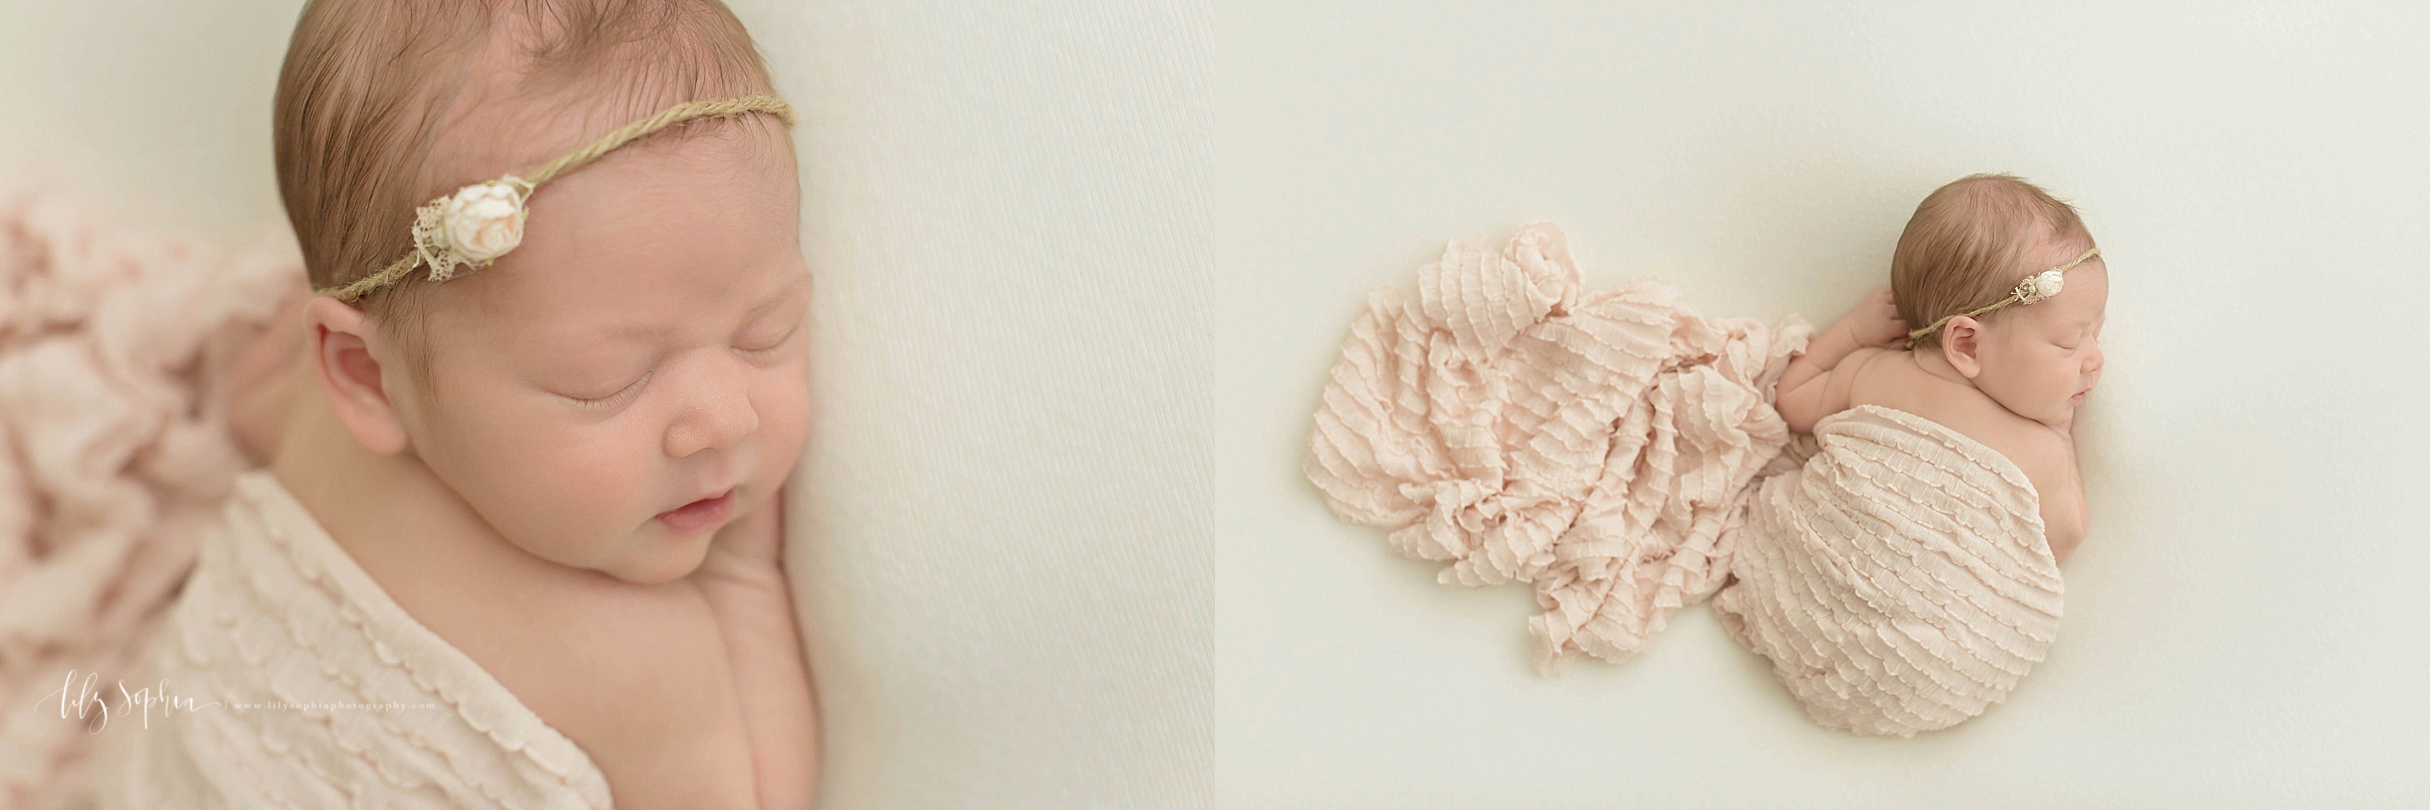  Side by side images of a sleeping, newborn, baby girl, on her stomach with a rosebud headband in her hair.&nbsp; 